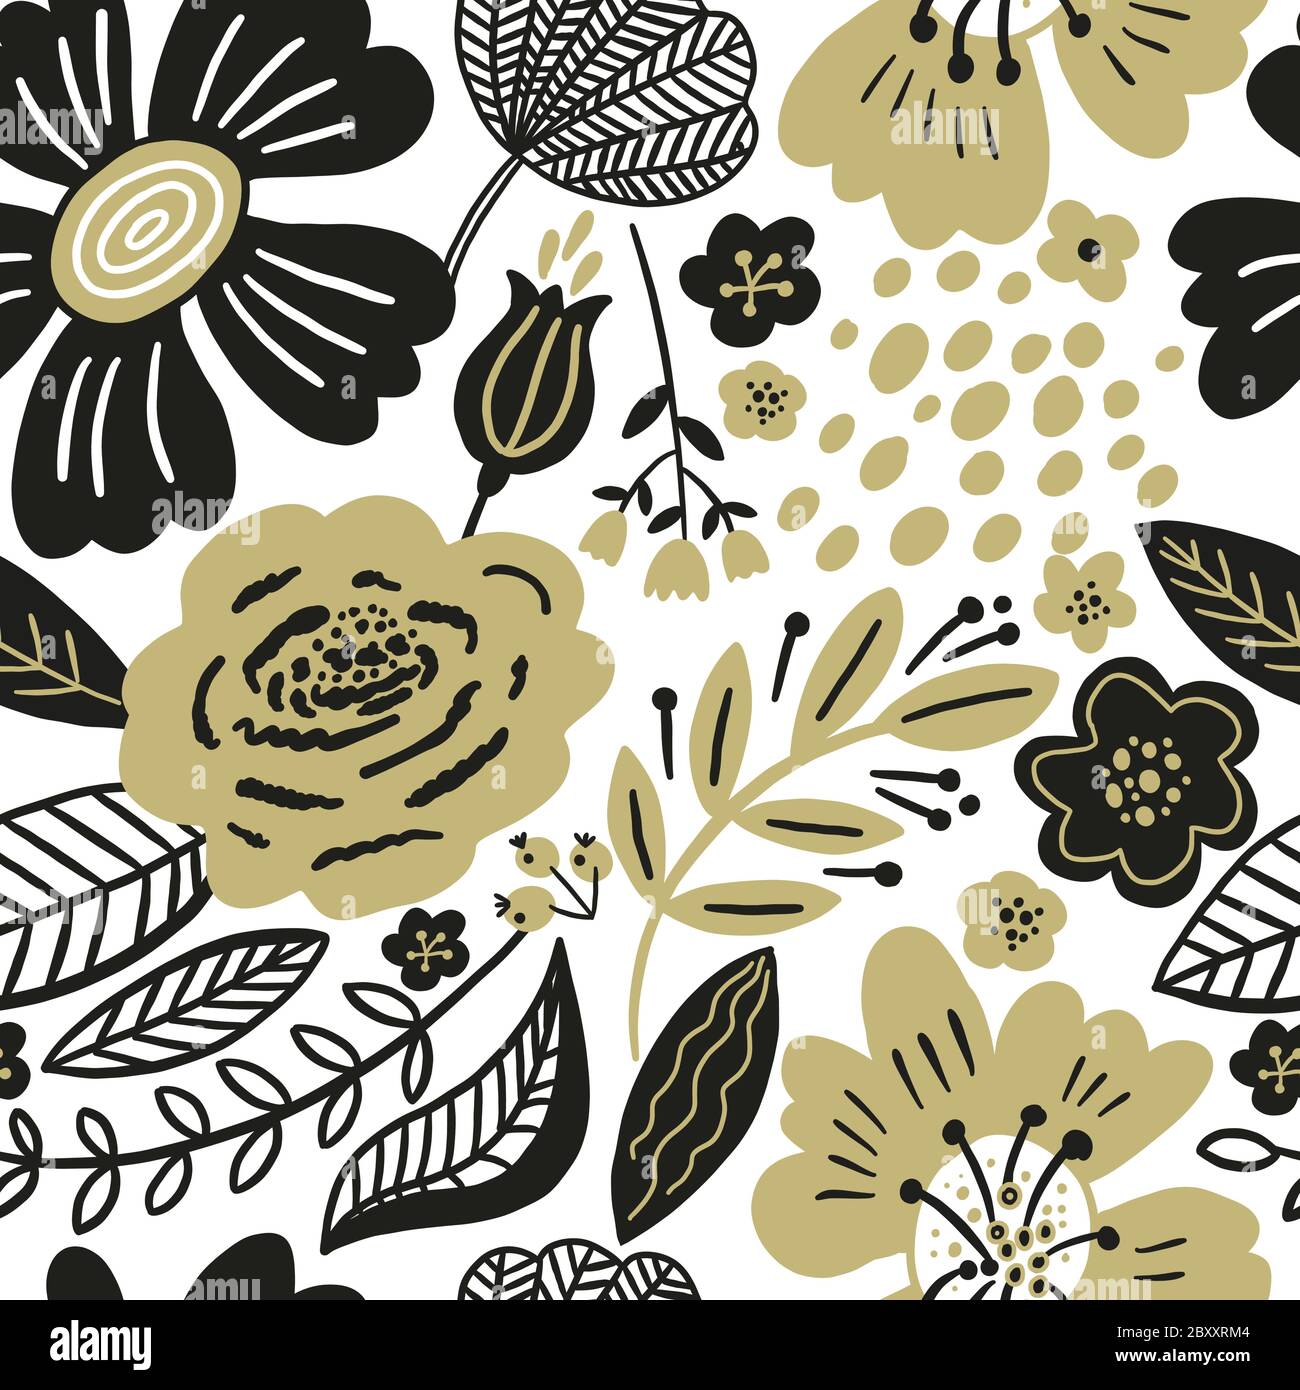 Vector floral seamless pattern gold and black colors. Flat flowers, petals, leaves with and doodle elements. Collage style botanical background for Stock Vector